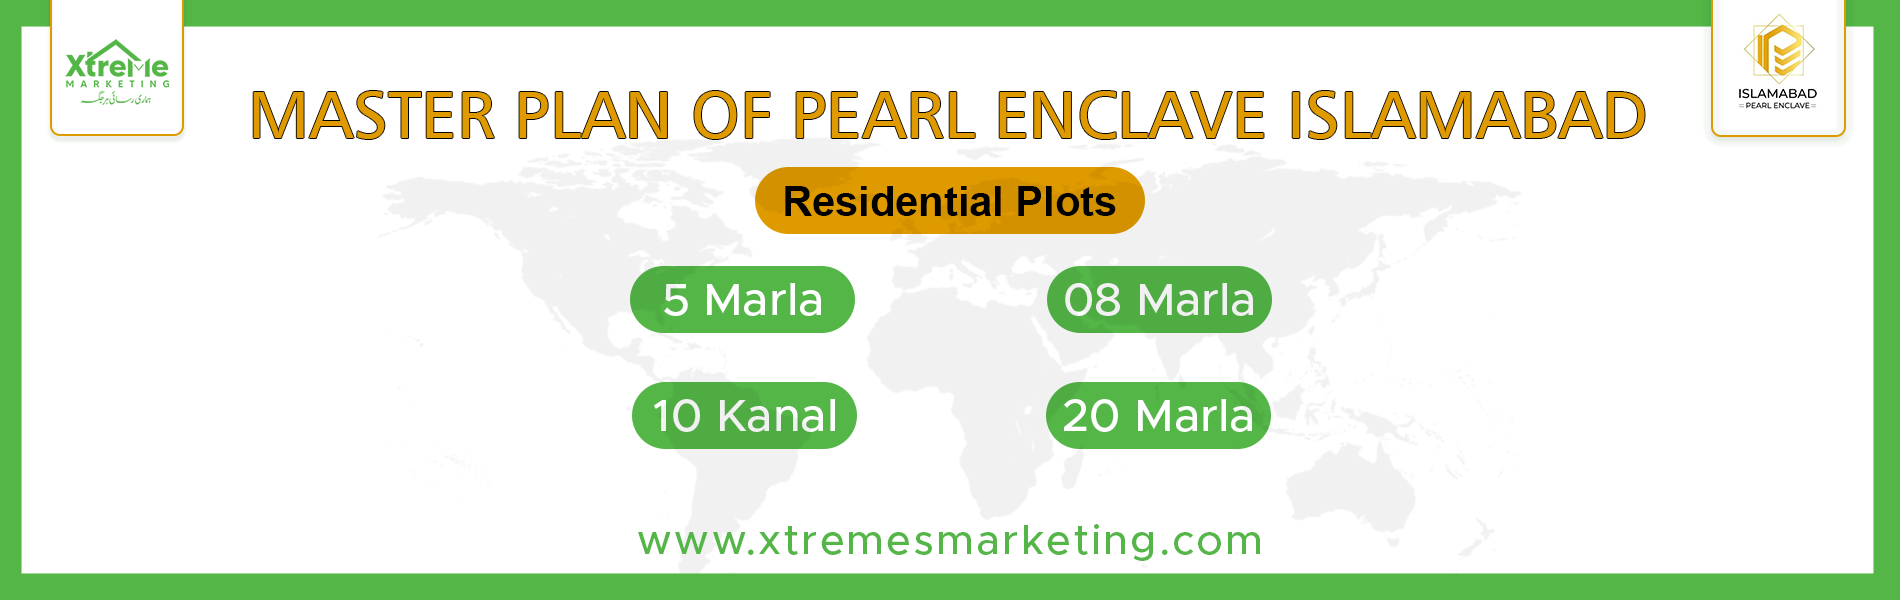 Pearl Enclave Islamabad master plan